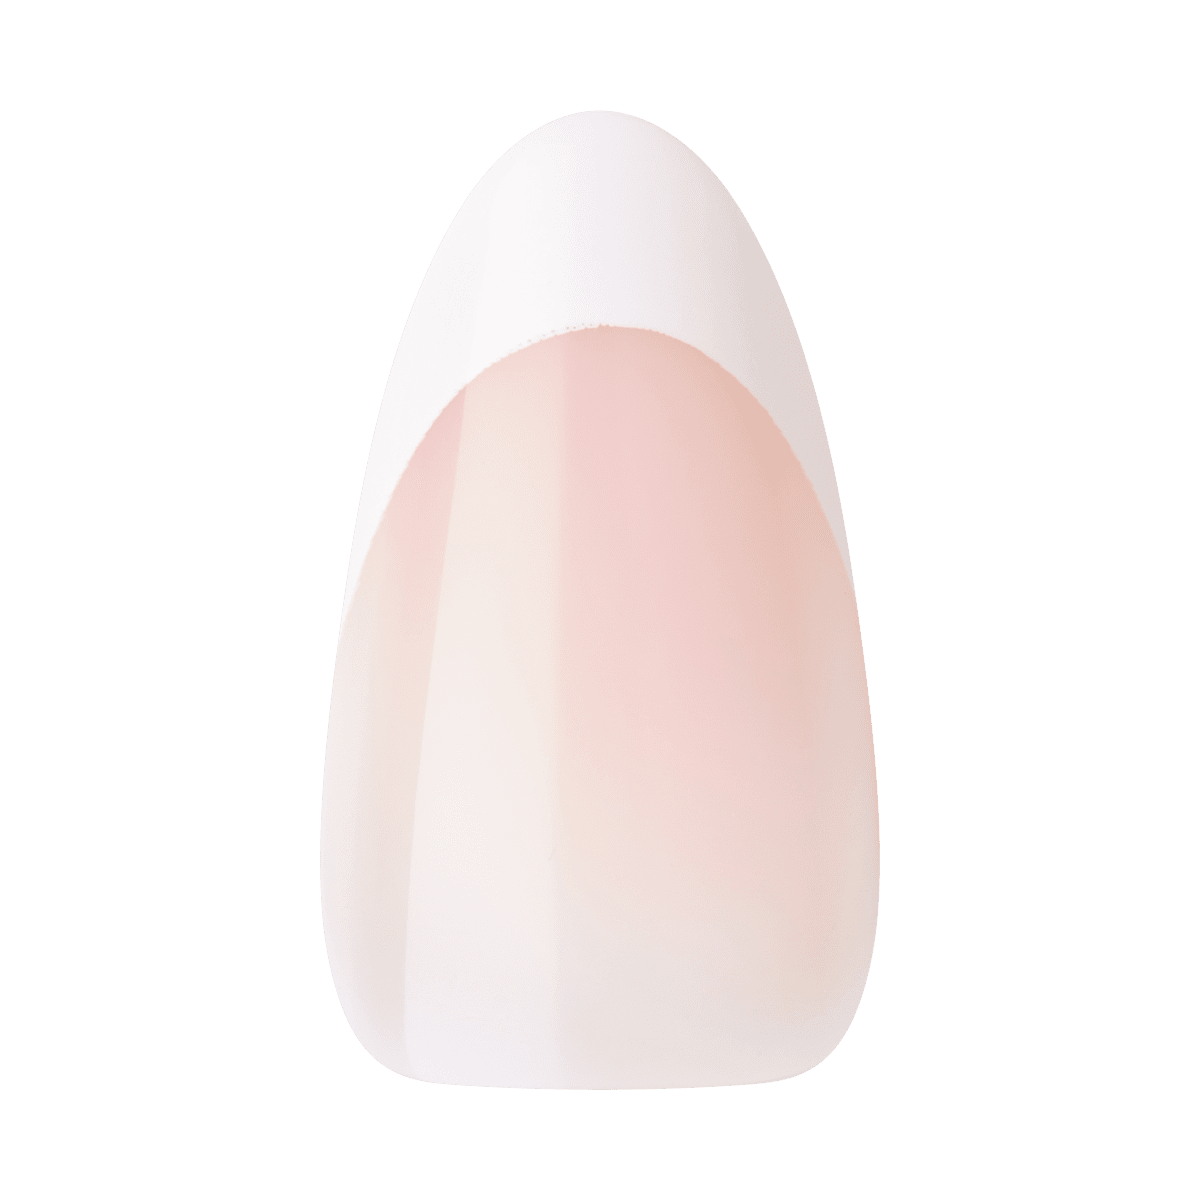 KISS Classy Nails, Press-On Nails, Dashing, White, Med Almond, 28ct